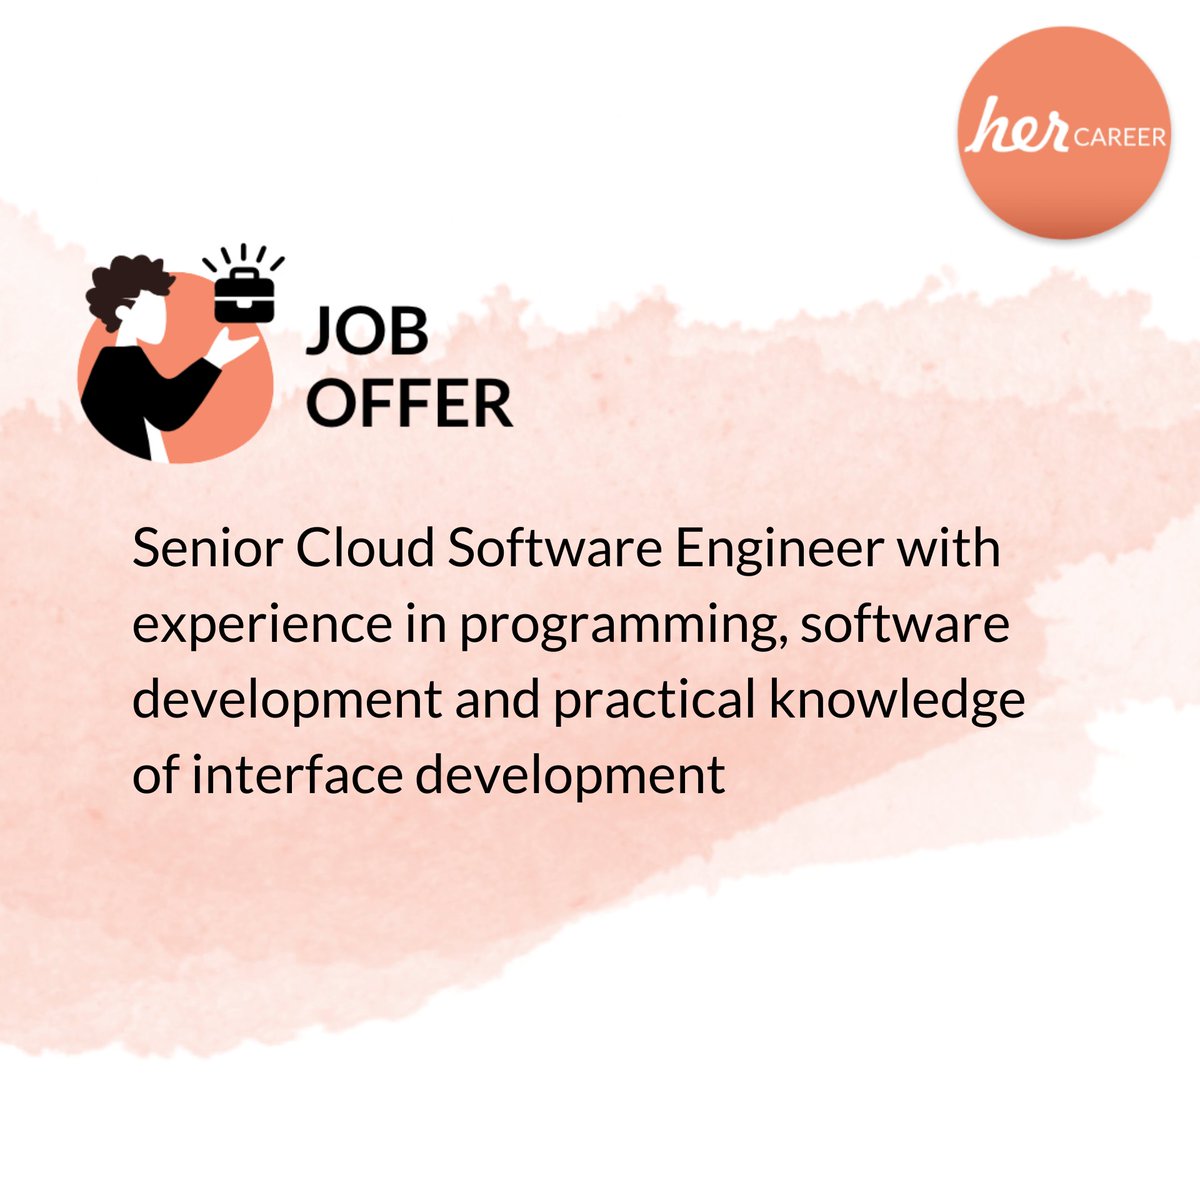 #CloudSoftwareEngineer  #SystemEngineering #Big4
Are you currently looking for a new job? Our client, one of the Big 4 Consulting firms, is looking for a Senior Cloud SoftwareEngineer . 🚀
 💜 Contact us via Mail: openpositions@her-career.com
#NewJob